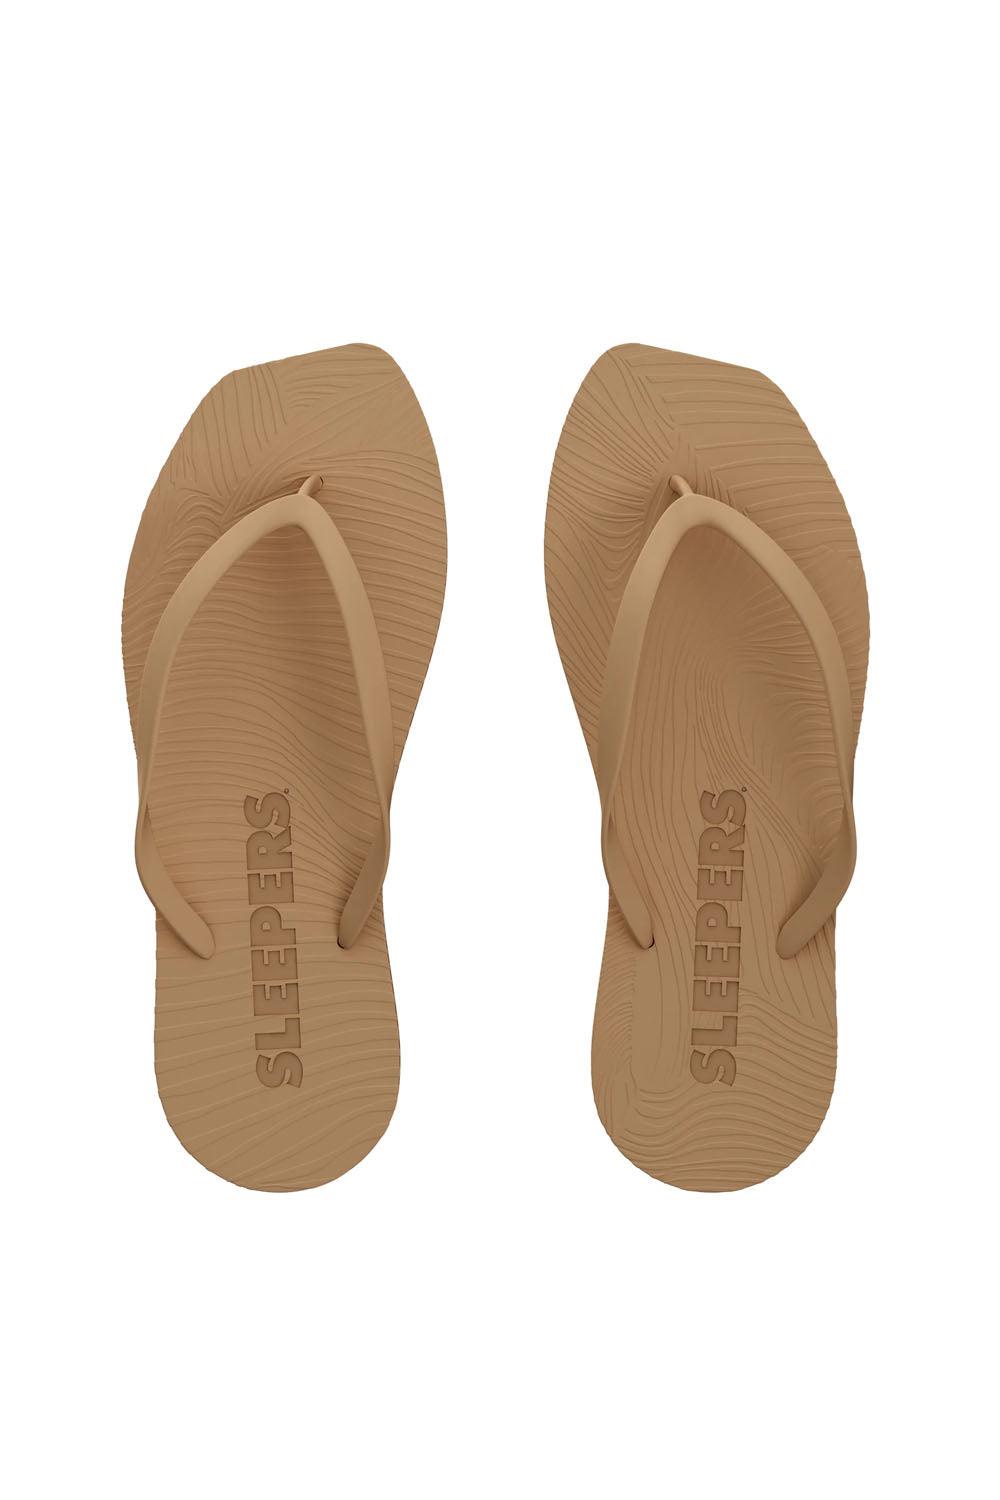 Sleepers Tapered Sand Flip Flop